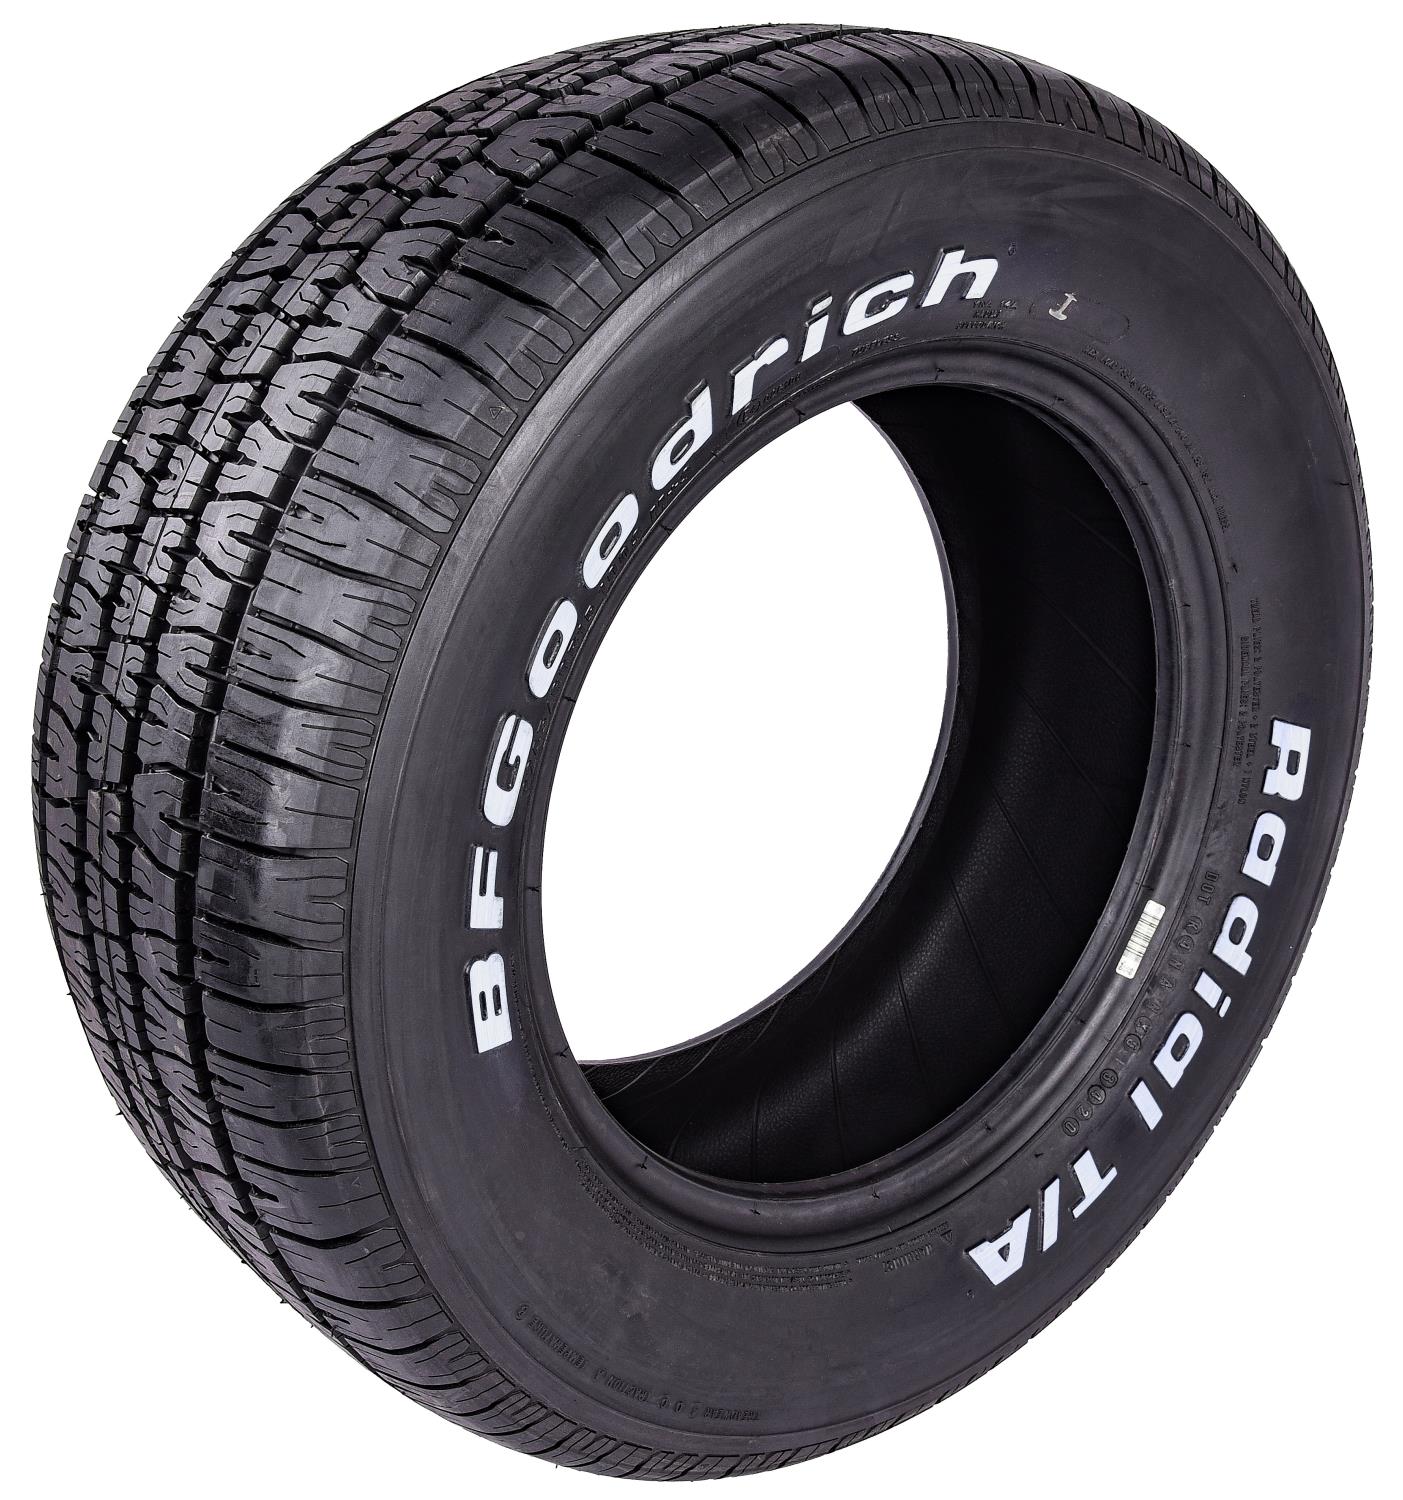 Radial T/A Tire P245/60R15